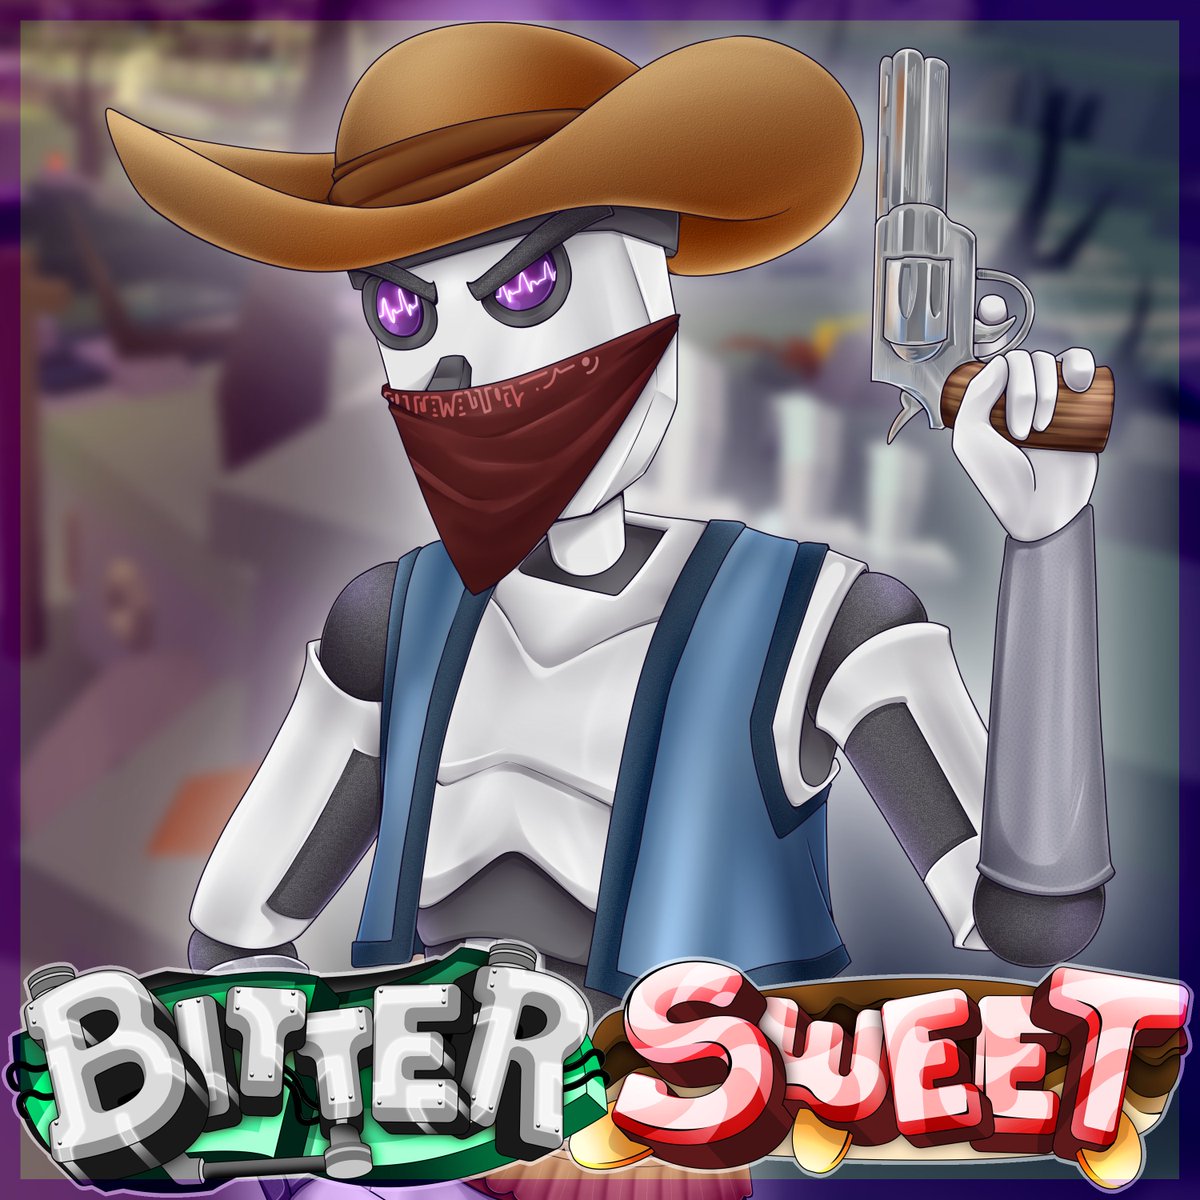 Roblox On Twitter Sweet Bittersweet S Myzta And Evilartist Show Off Their Steampunk Candy Battle Arena On Thenextlevel At 3pm Pdt Streams Start With Build Together At 2pm Https T Co T4vppe04qo Https T Co O6enkkb8qc - roblox bittersweet codes